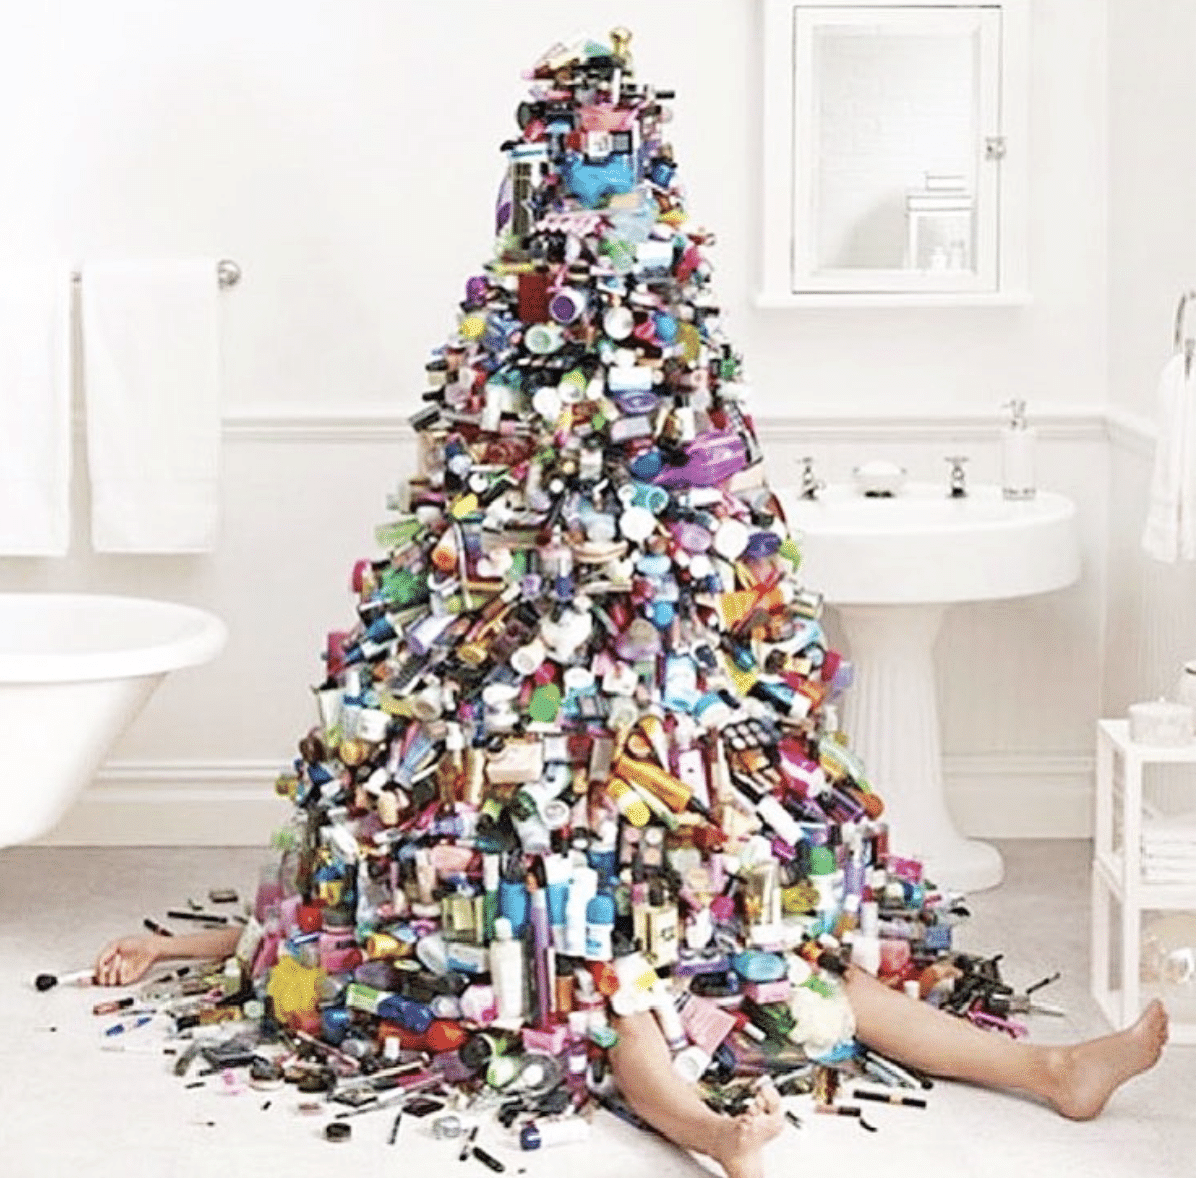 person laying under pile of toiletries